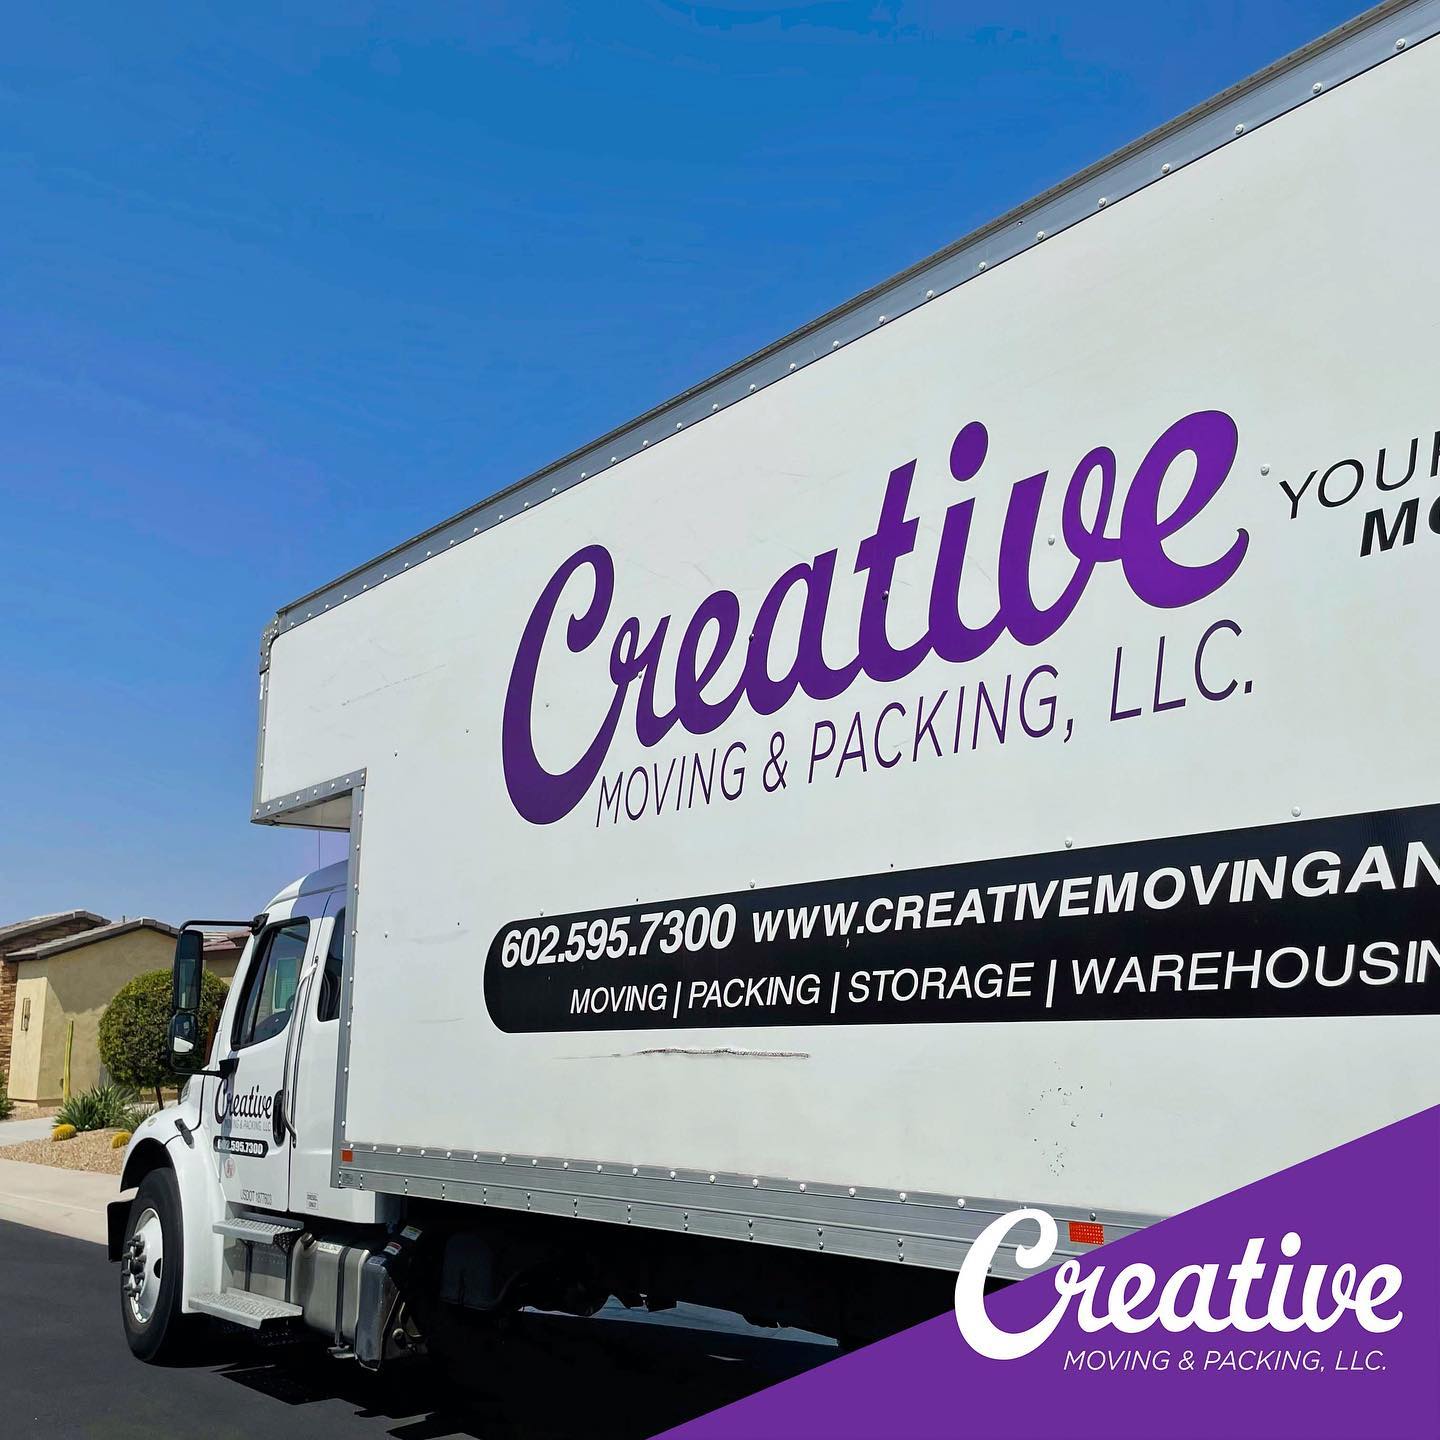 Creative Moving and Packing, LLC